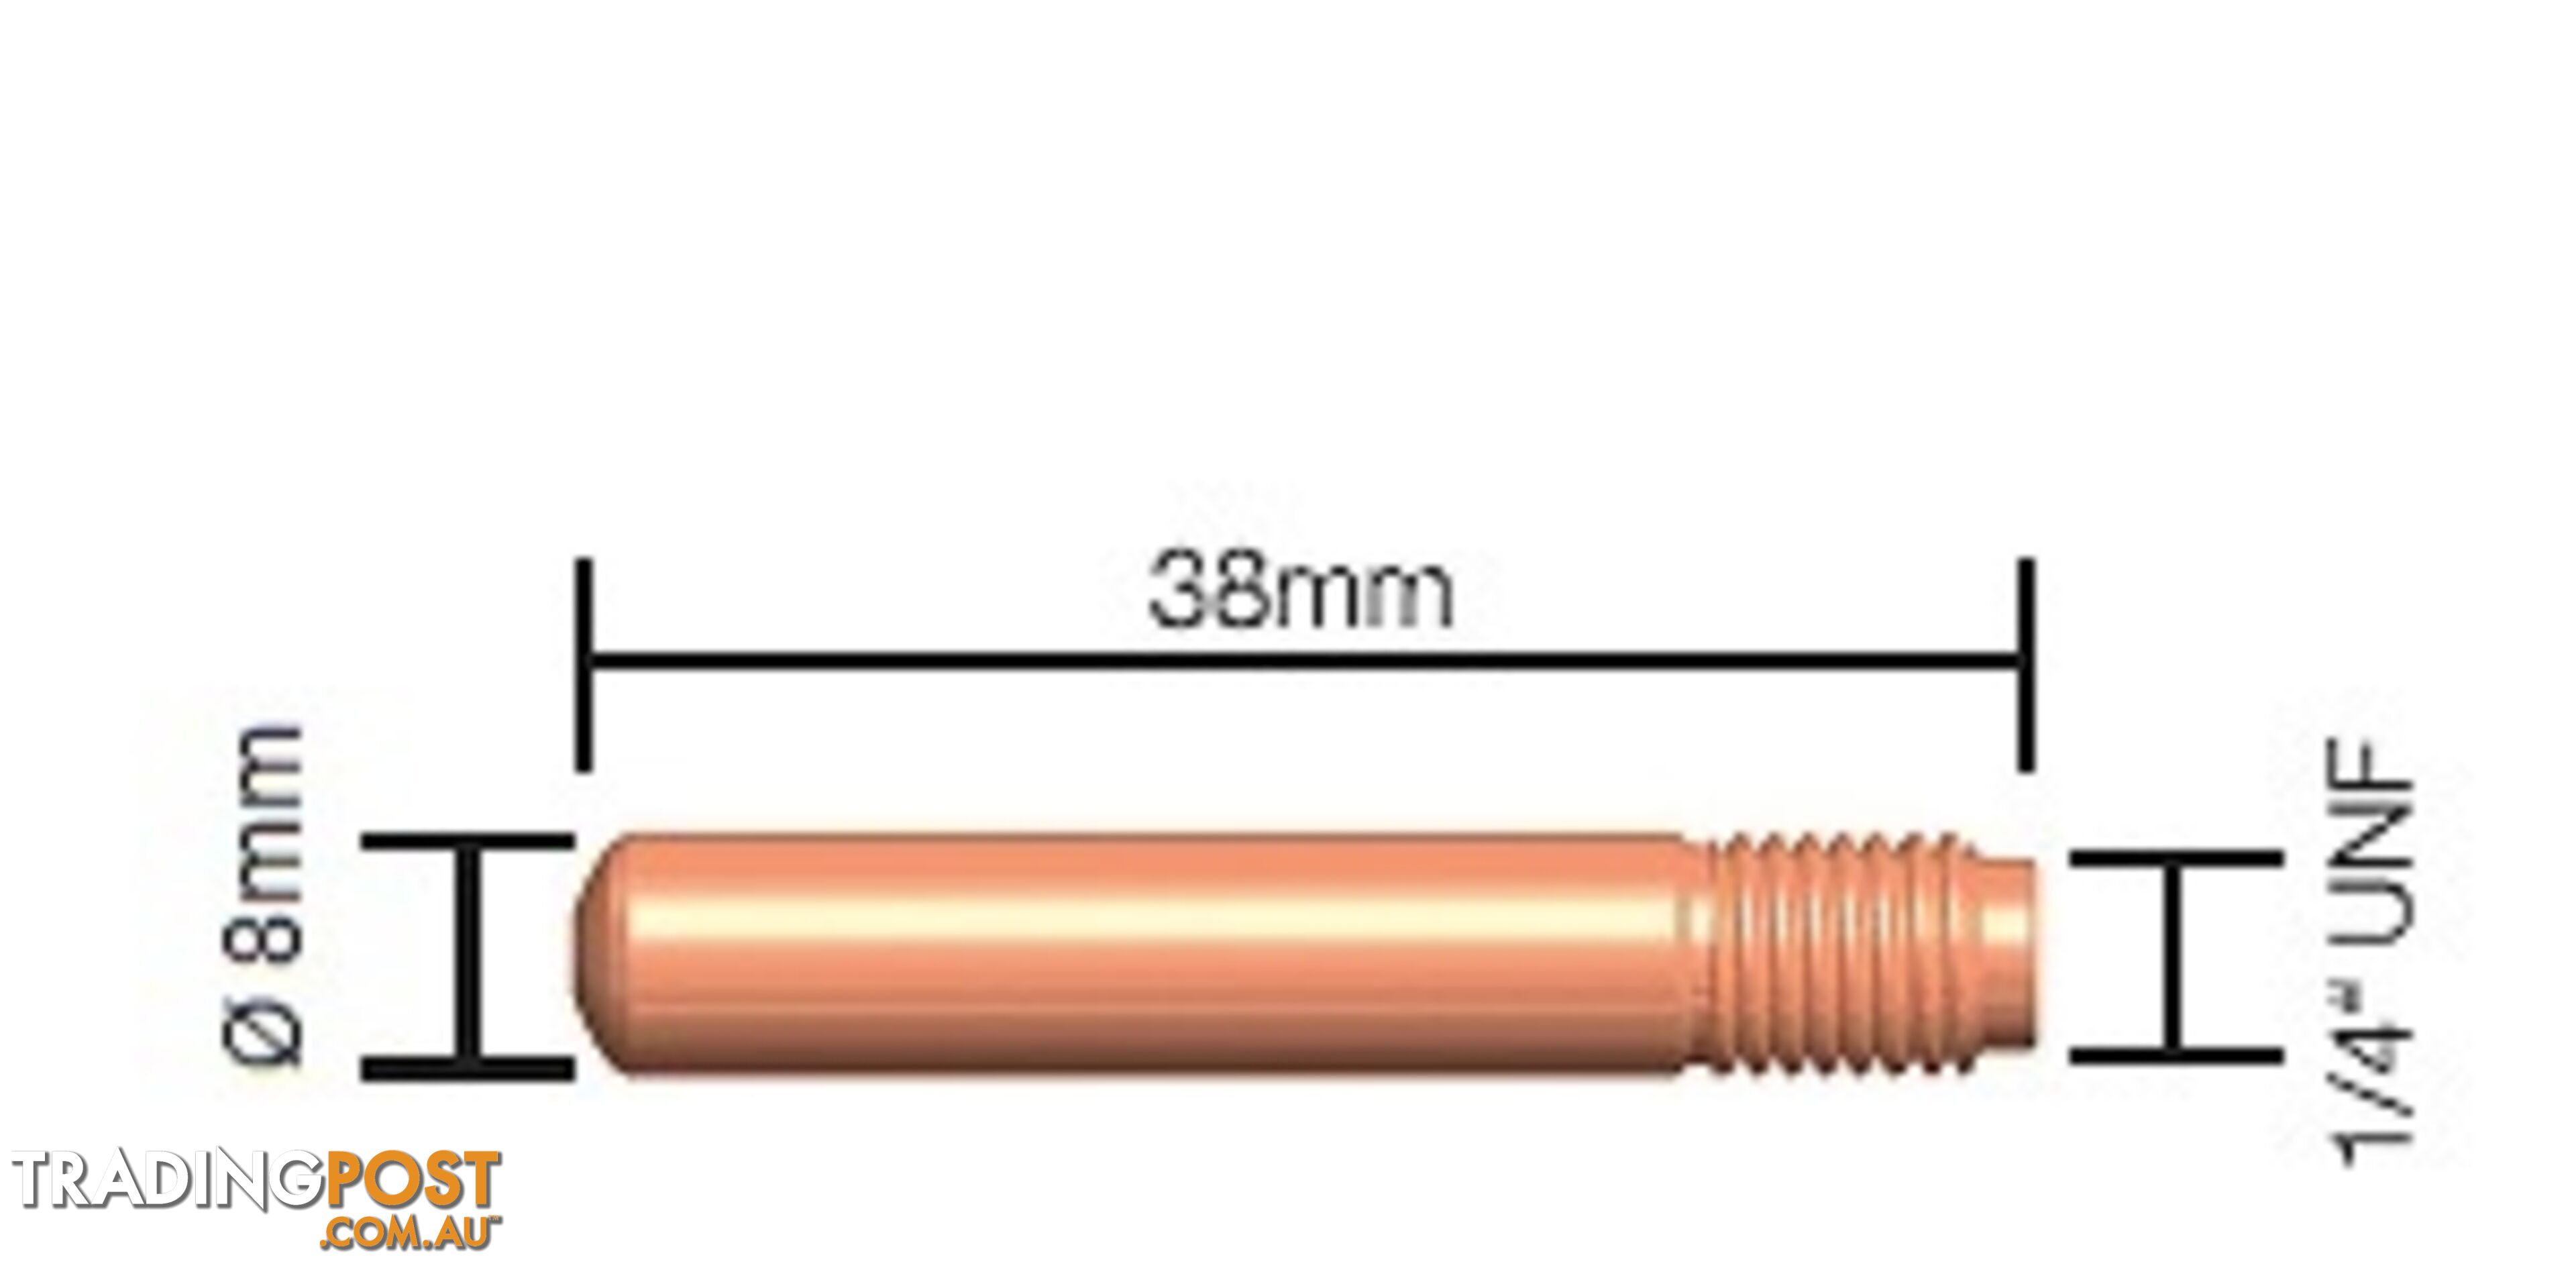 0.8mm Contact Tip Standard Duty (Tweco Style 2 & 4) 14-30 Pkt : 10